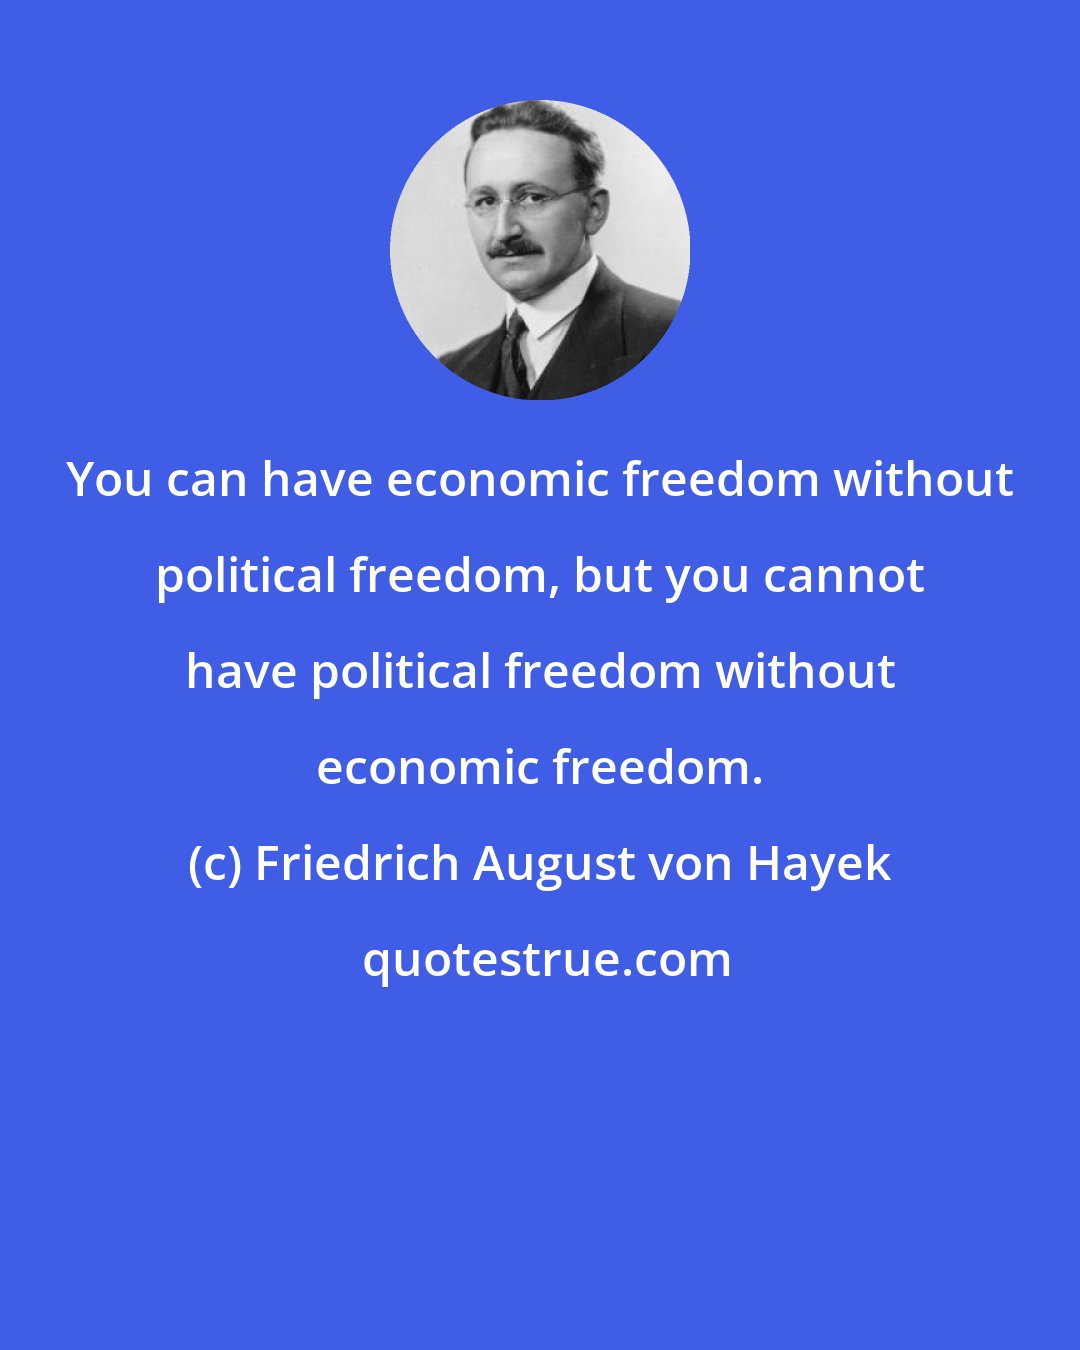 Friedrich August von Hayek: You can have economic freedom without political freedom, but you cannot have political freedom without economic freedom.